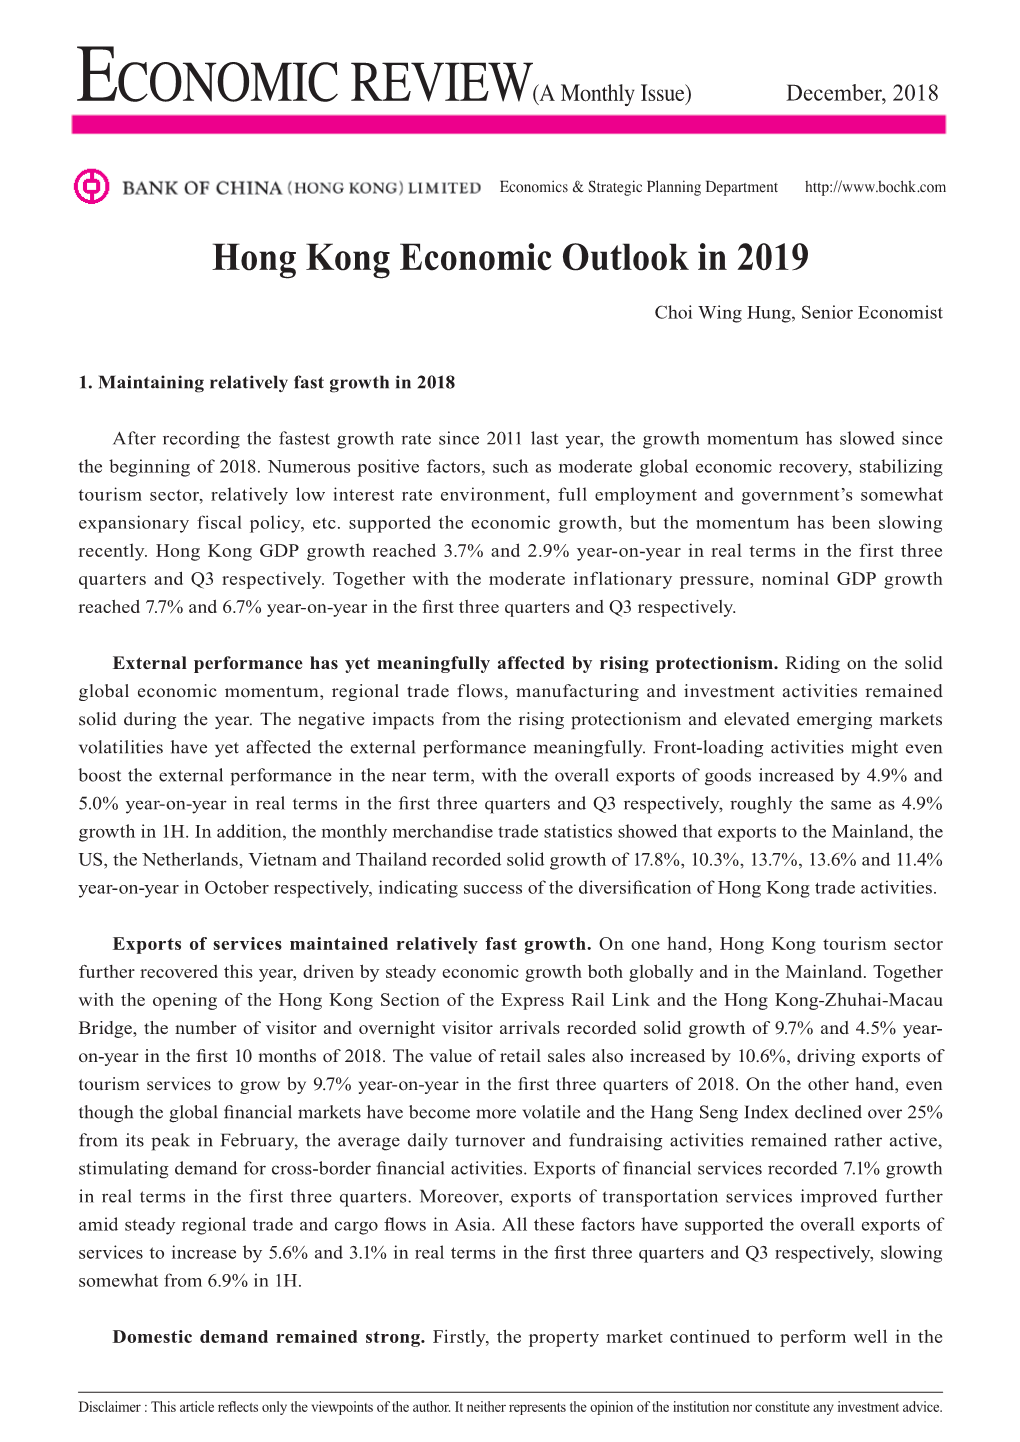 Hong Kong Economic Outlook in 2019 the Reasons Why the Singapore